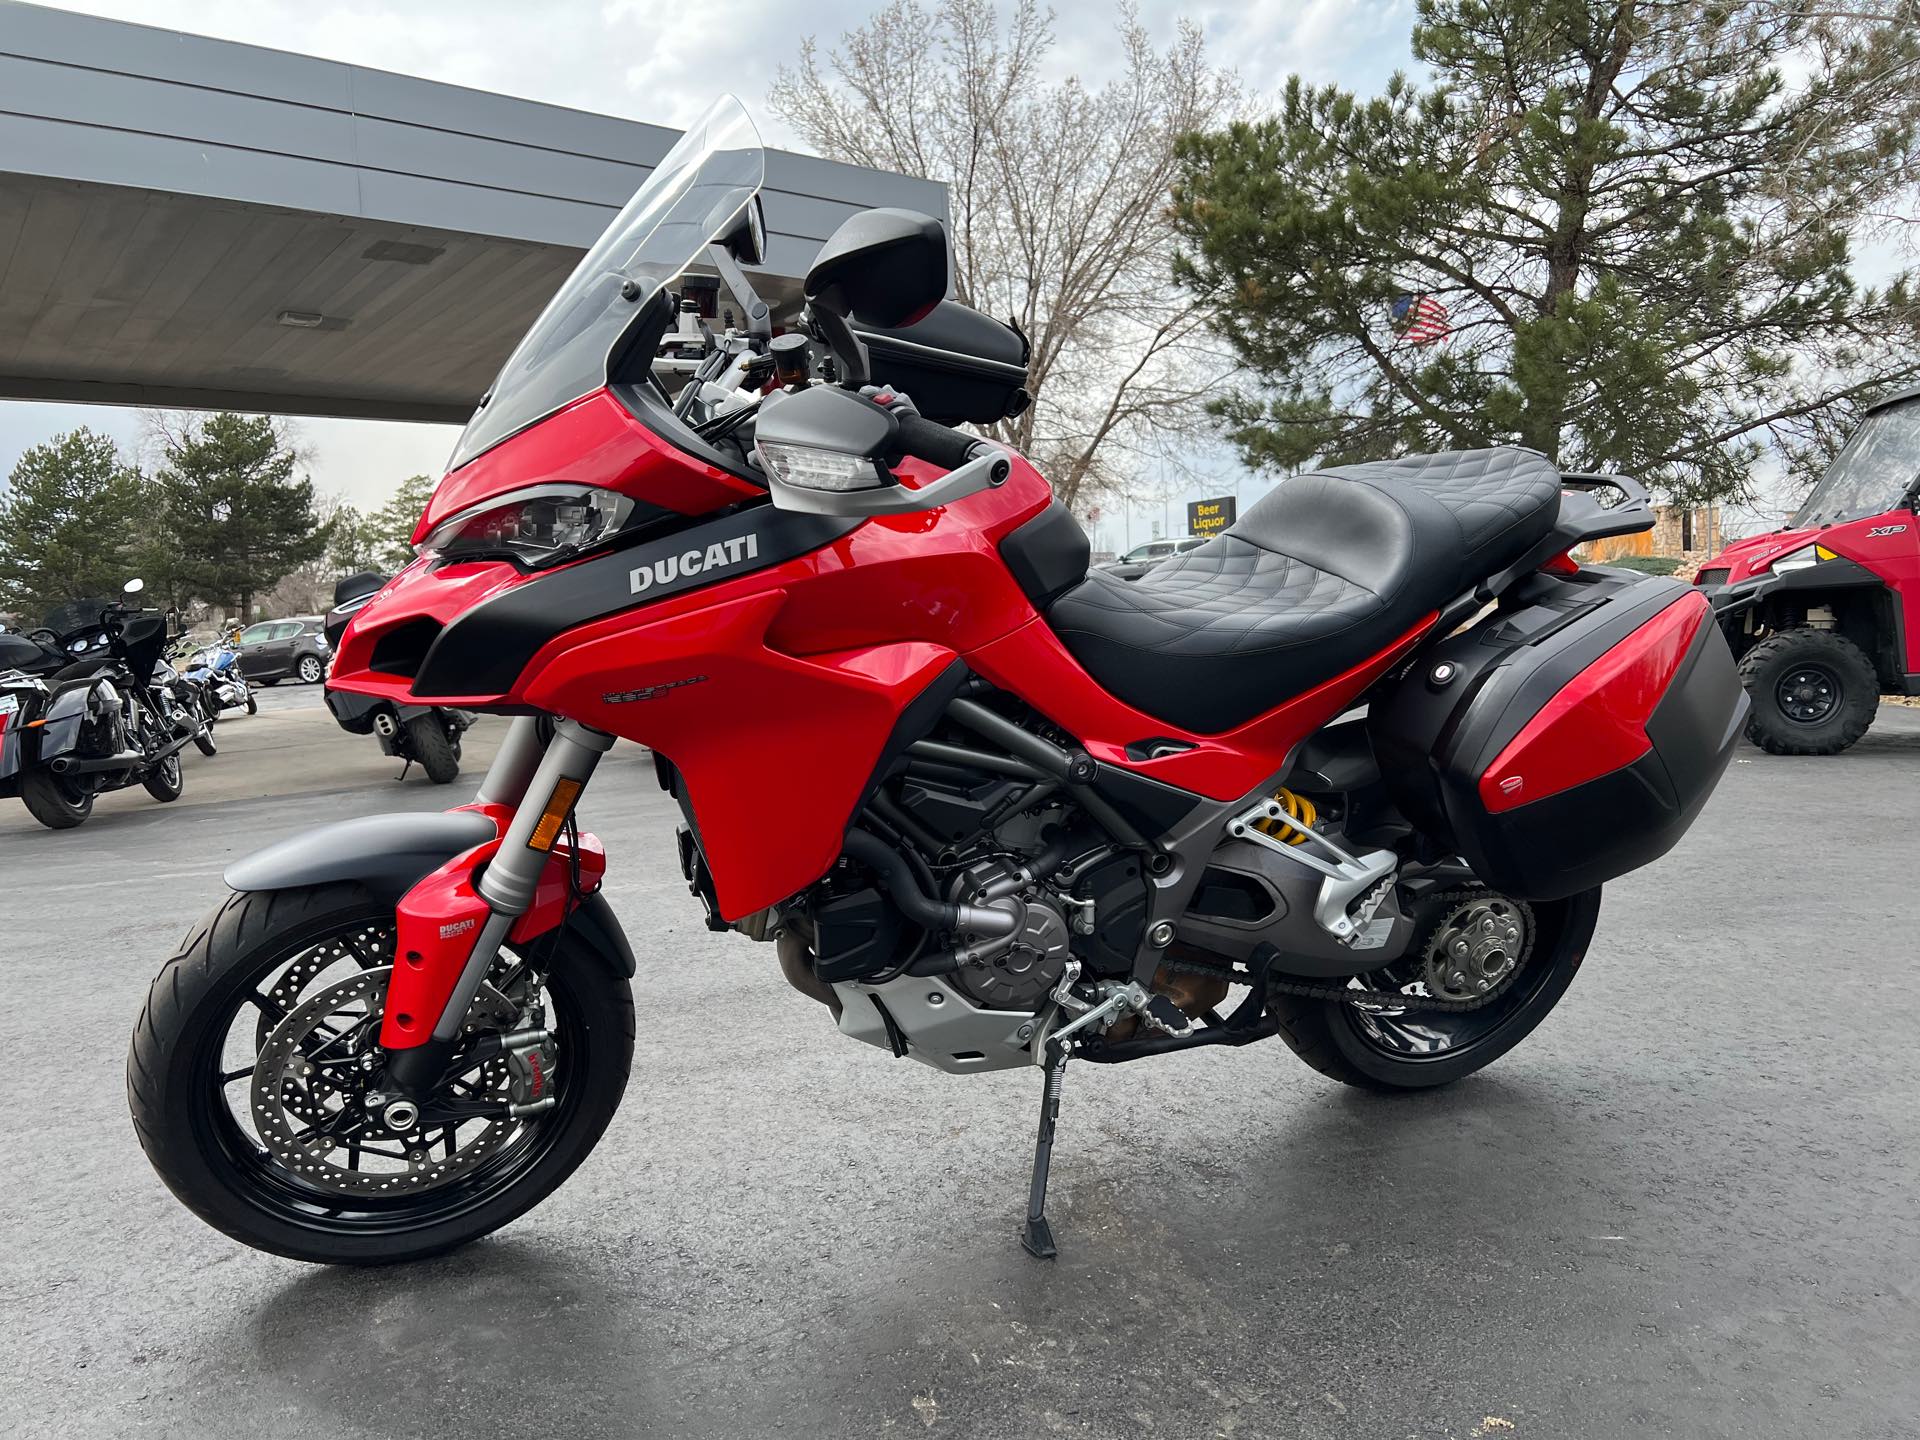 2018 Ducati Multistrada 1260 S at Aces Motorcycles - Fort Collins